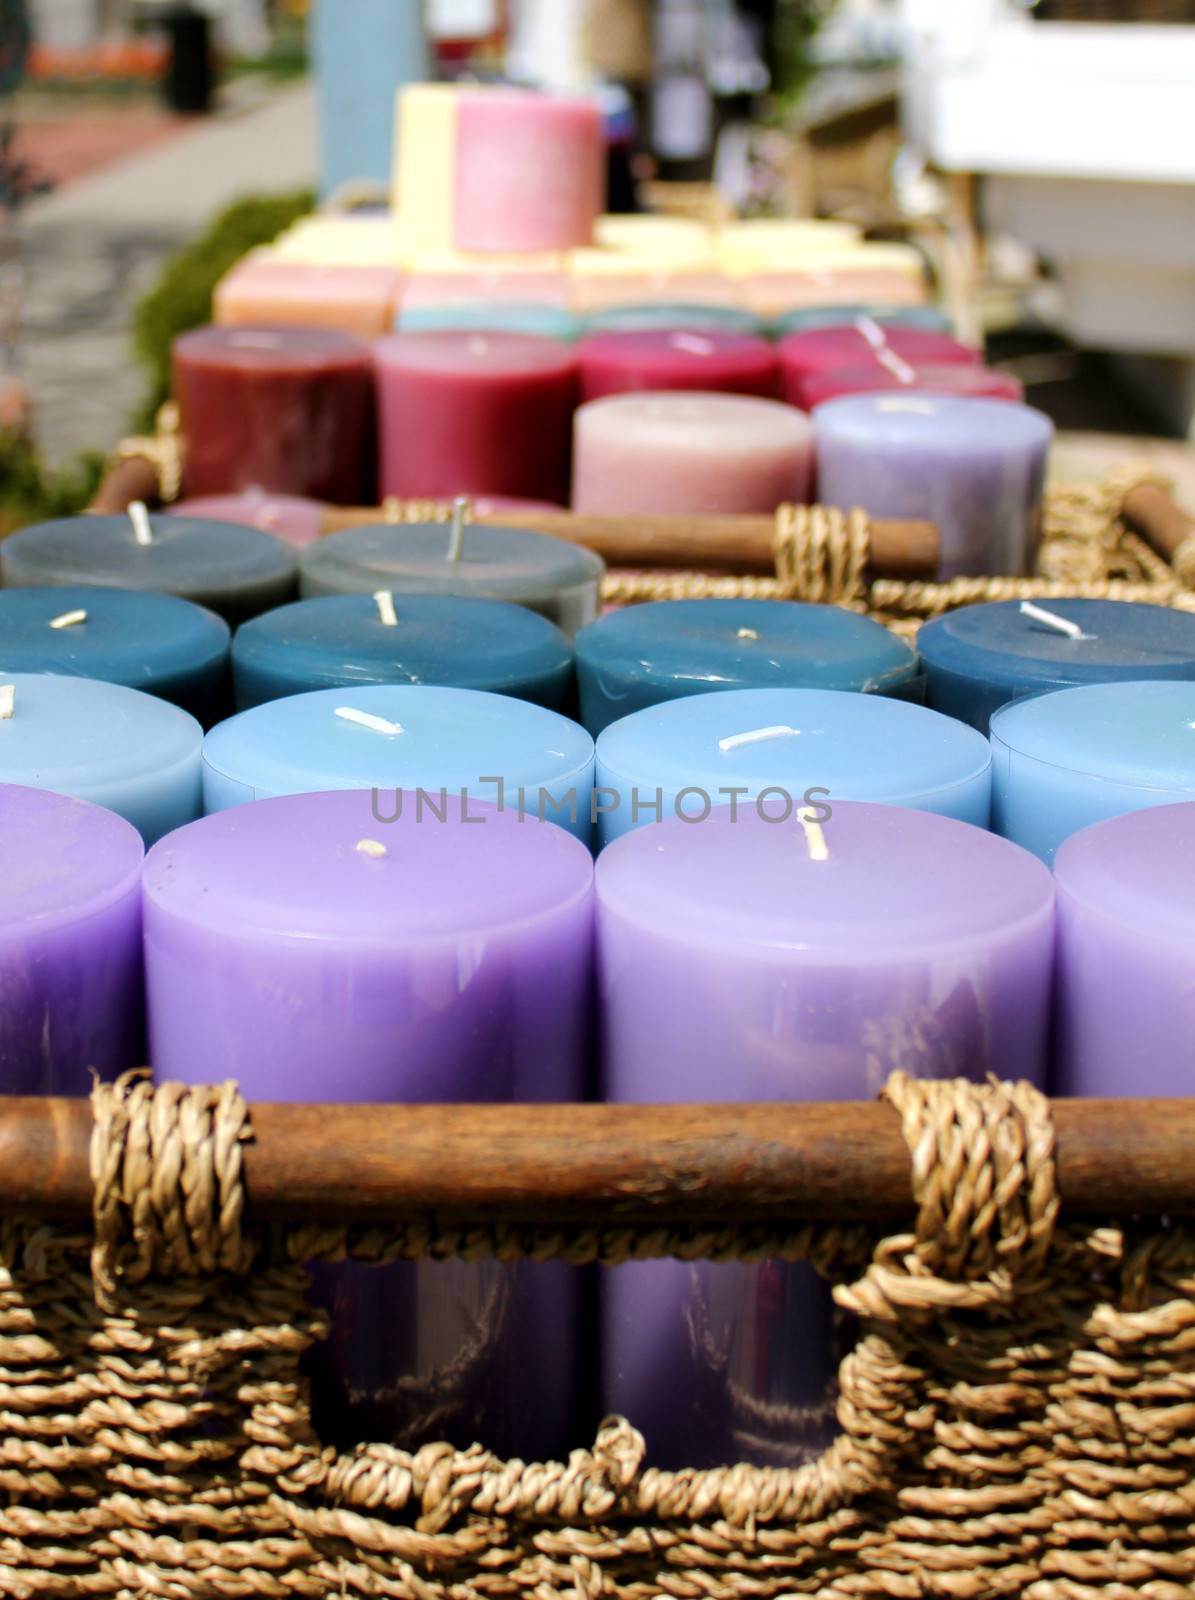 Candles for Sale by mpk1970